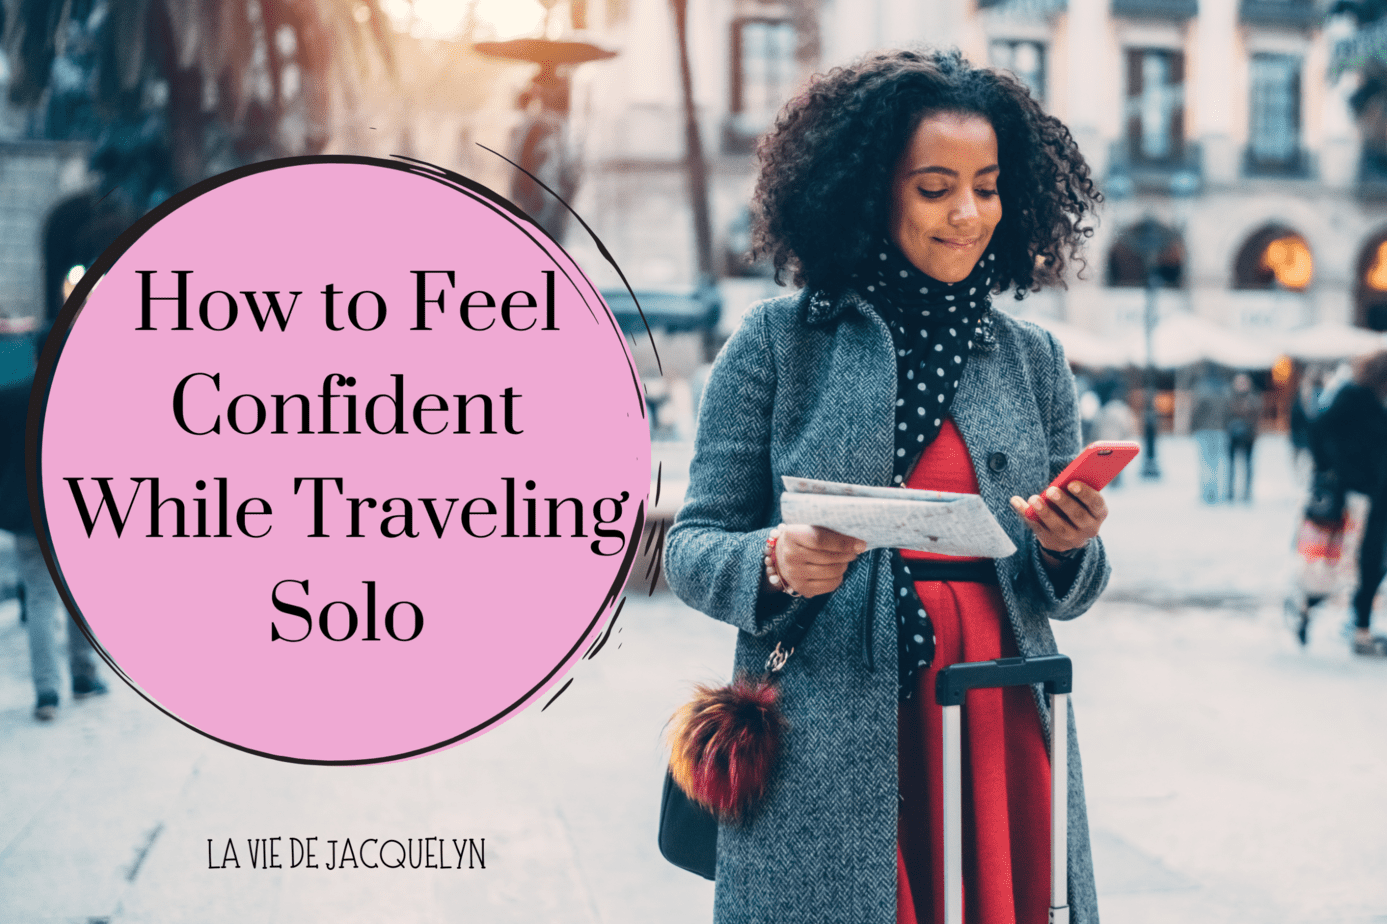 How to feel confident while traveling solo